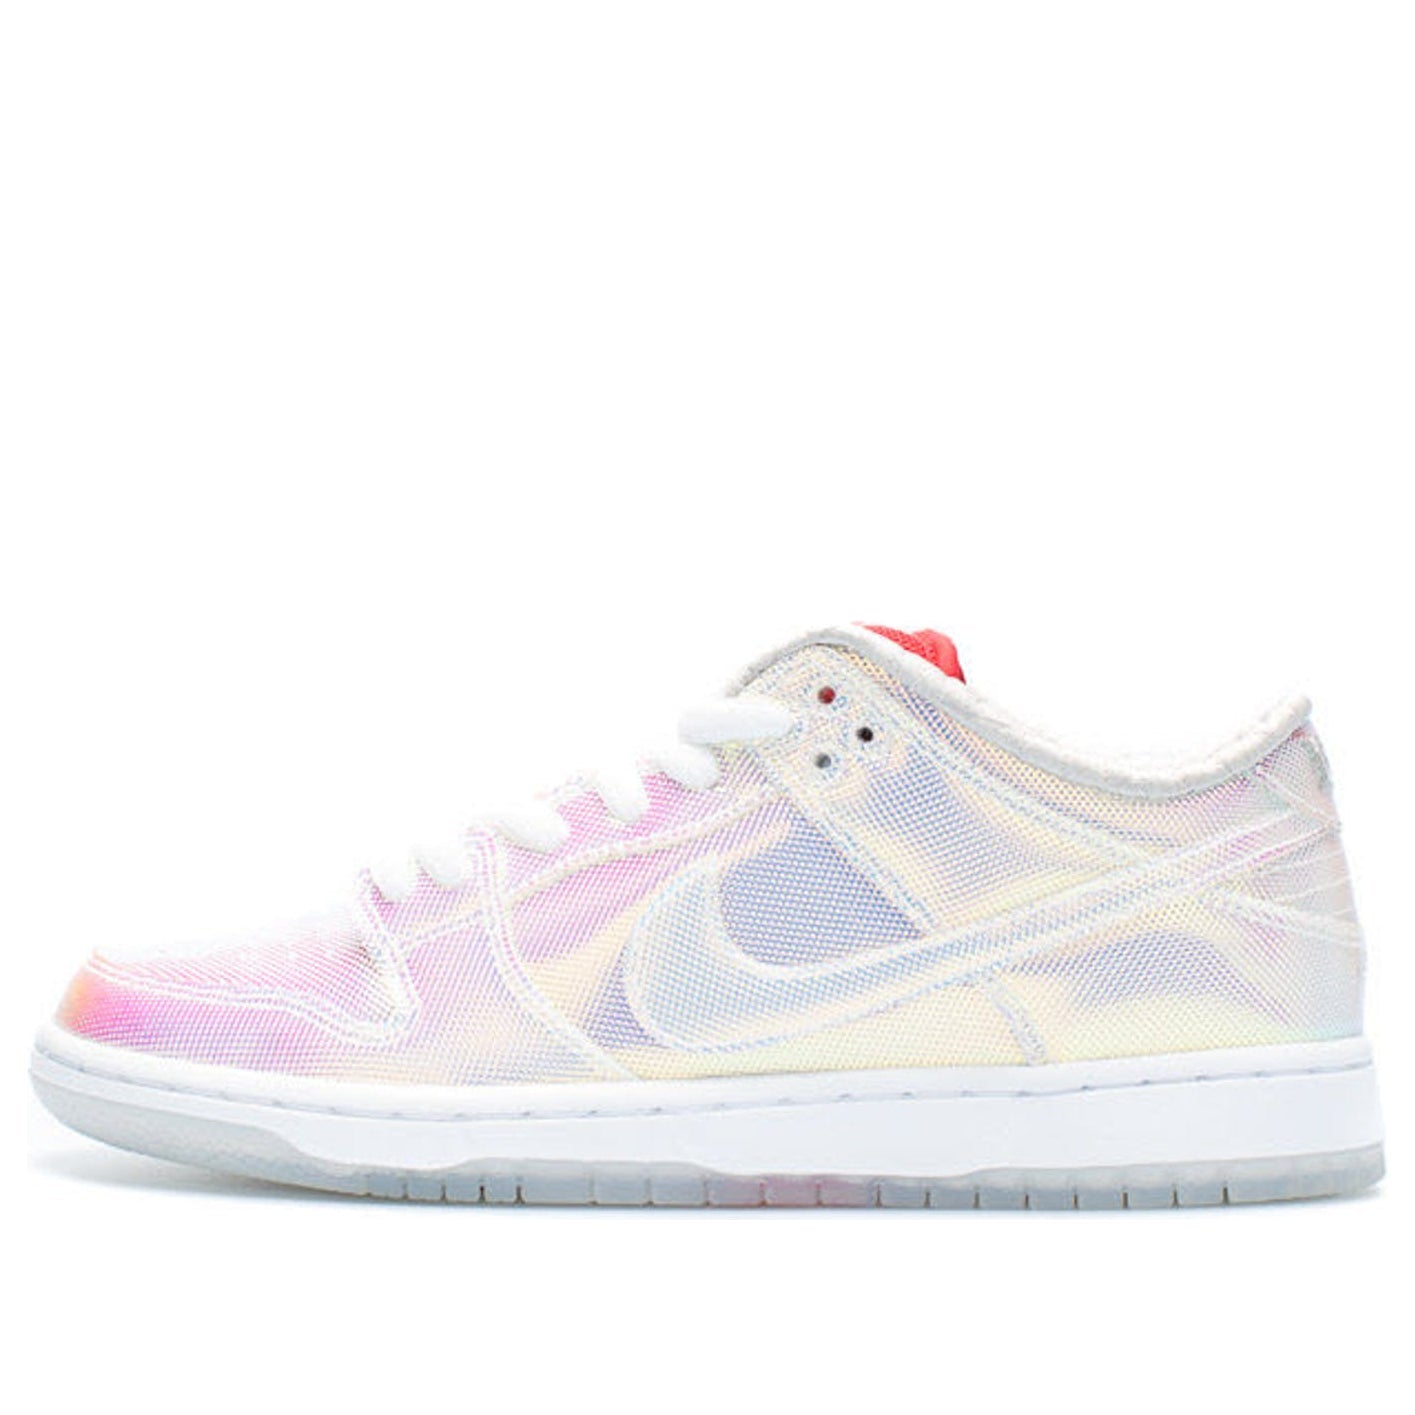 Nike Concepts x Dunk Low Pro SB 'Holy Grail'  504750-140 Antique Icons